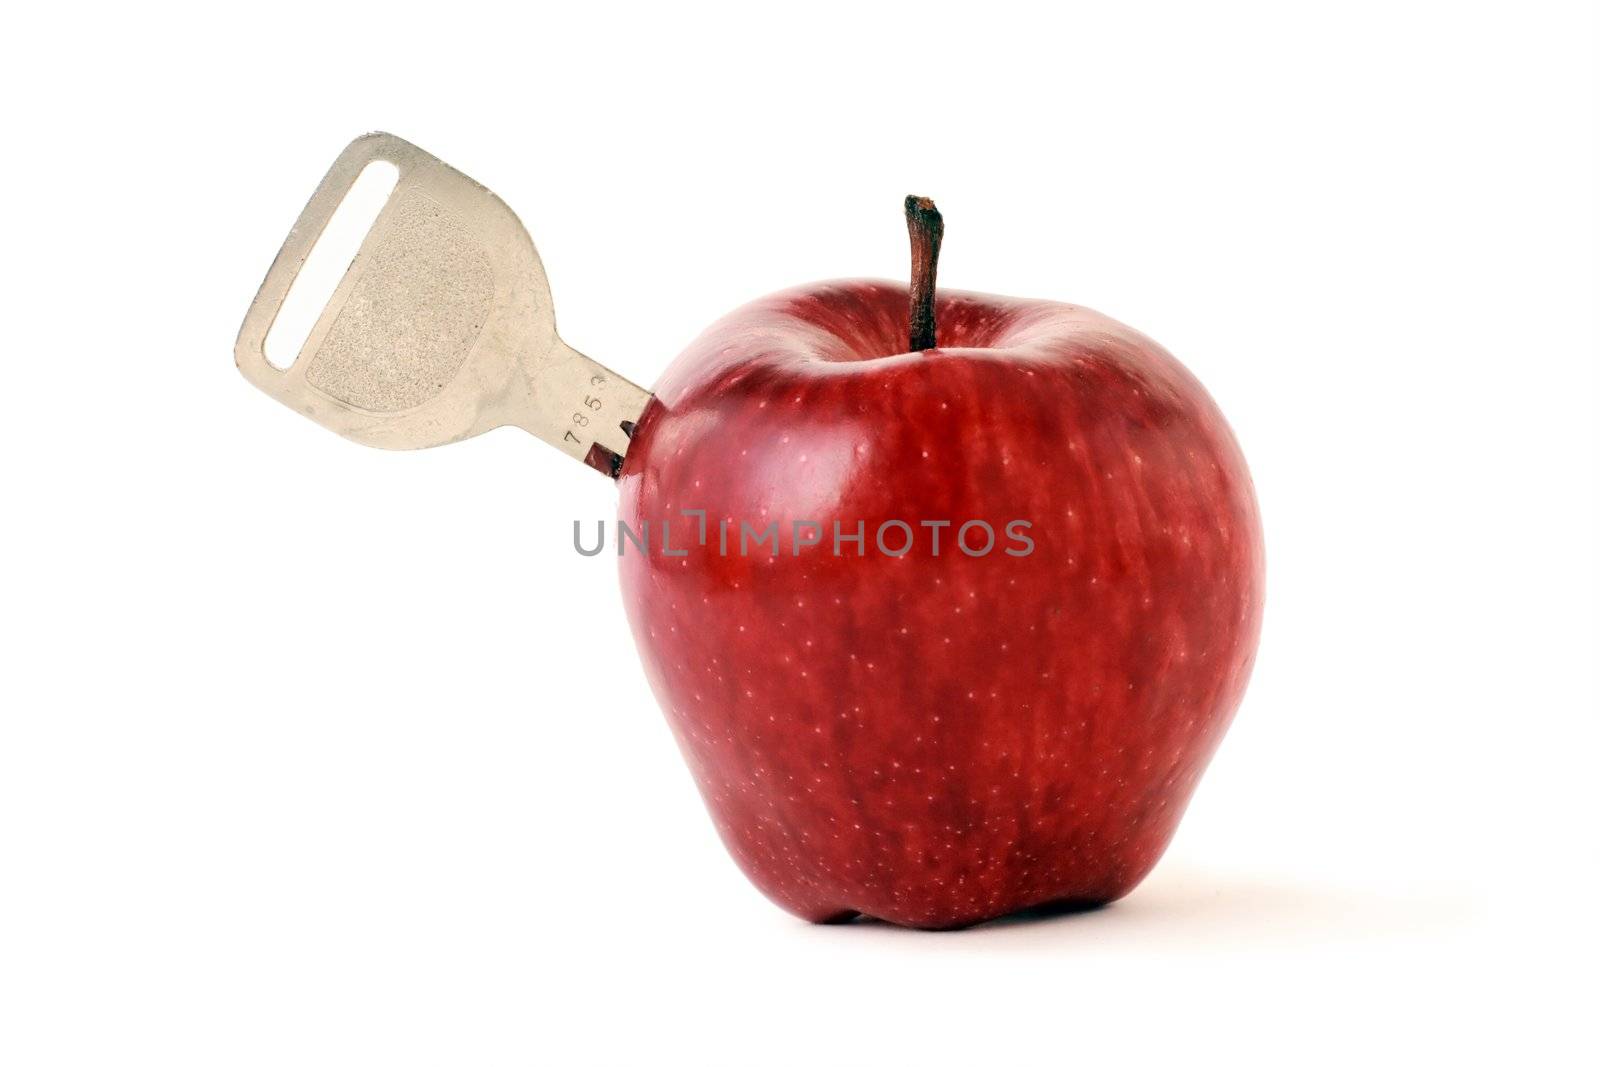 key is inserted into the fruit, apple